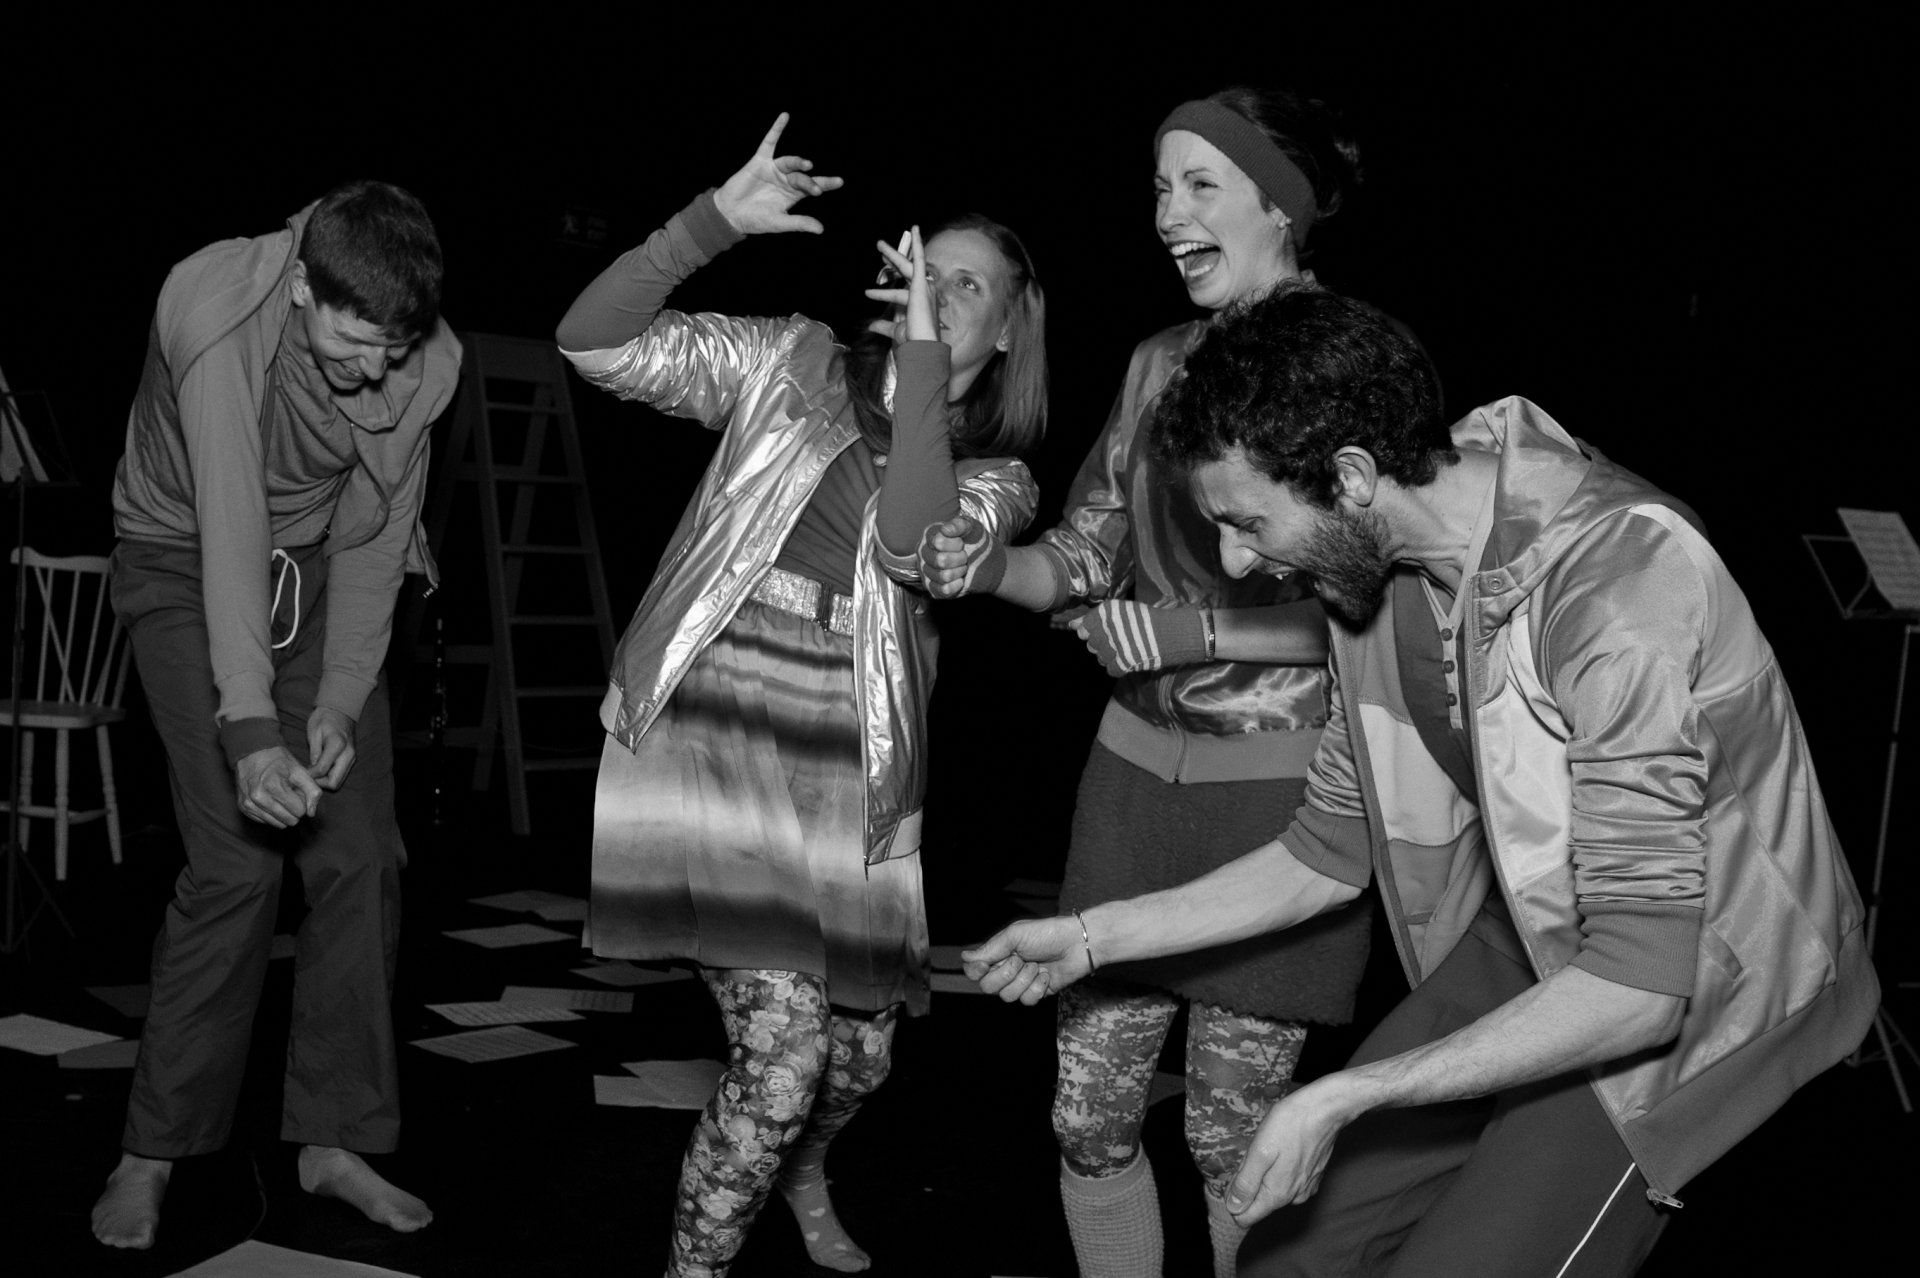 a group of people are dancing together in a black and white photo .